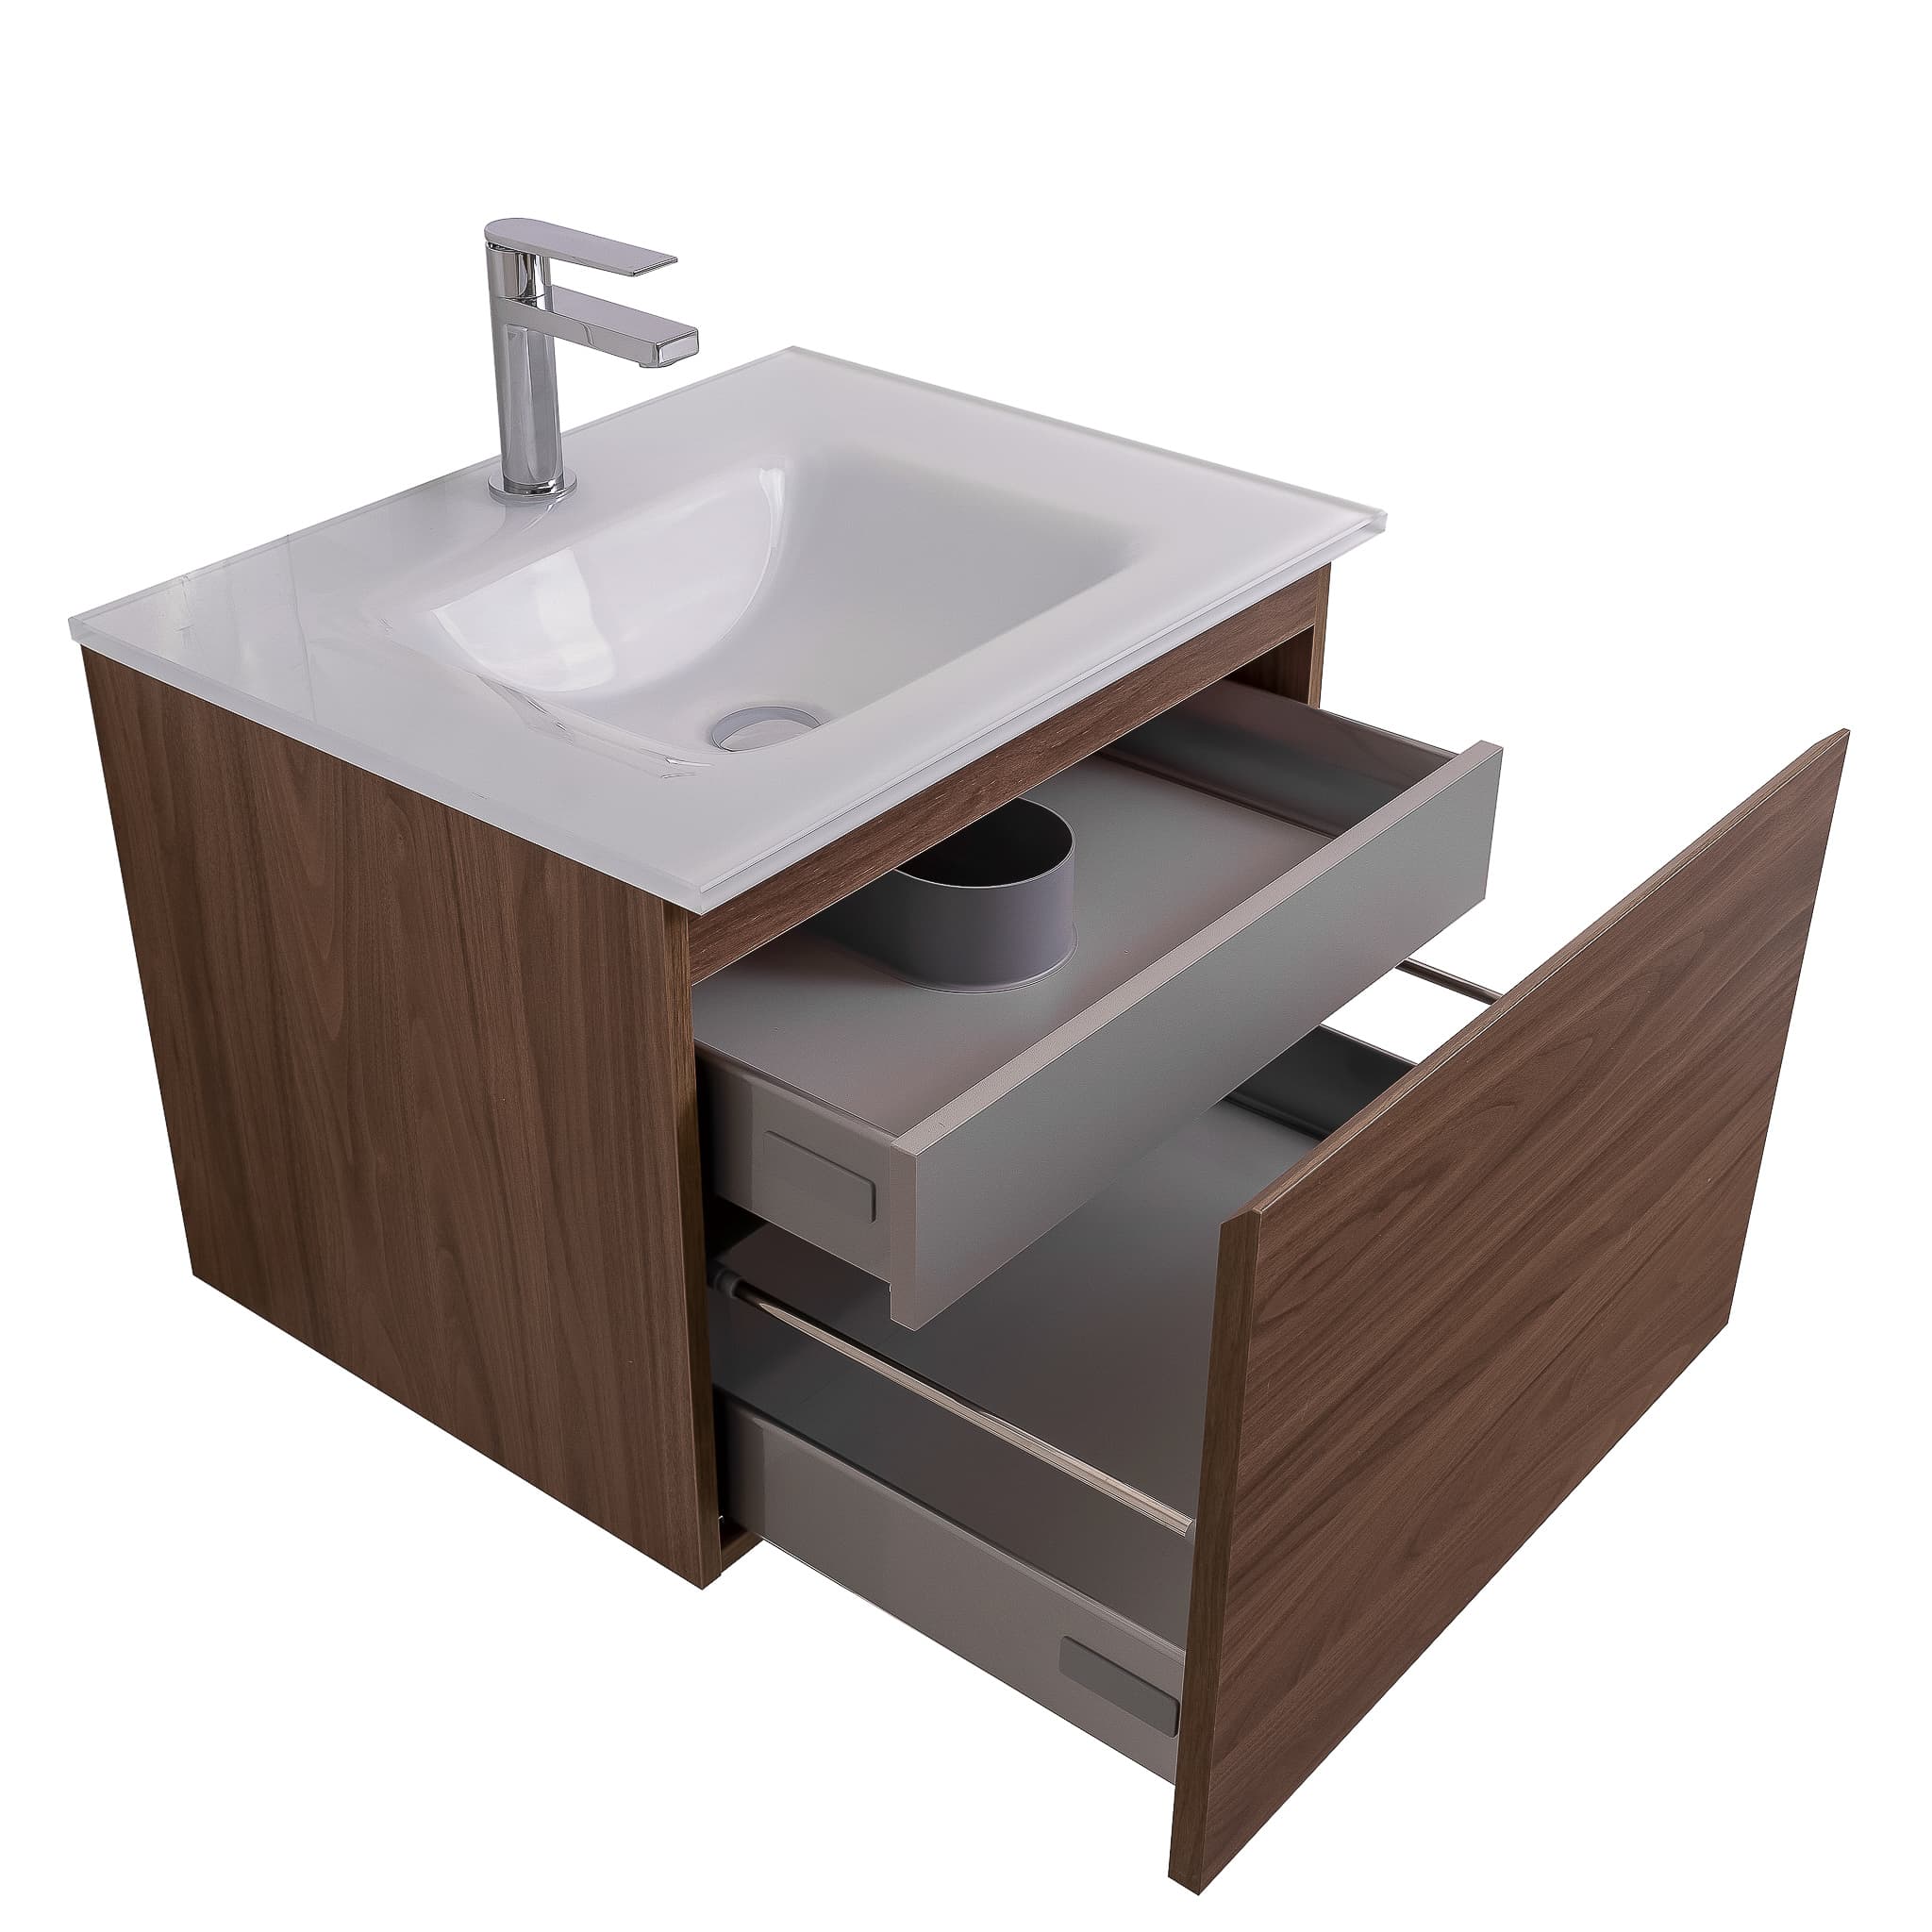 Venice 23.5 Walnut Wood Texture Cabinet, White Tempered Glass Sink, Wall Mounted Modern Vanity Set